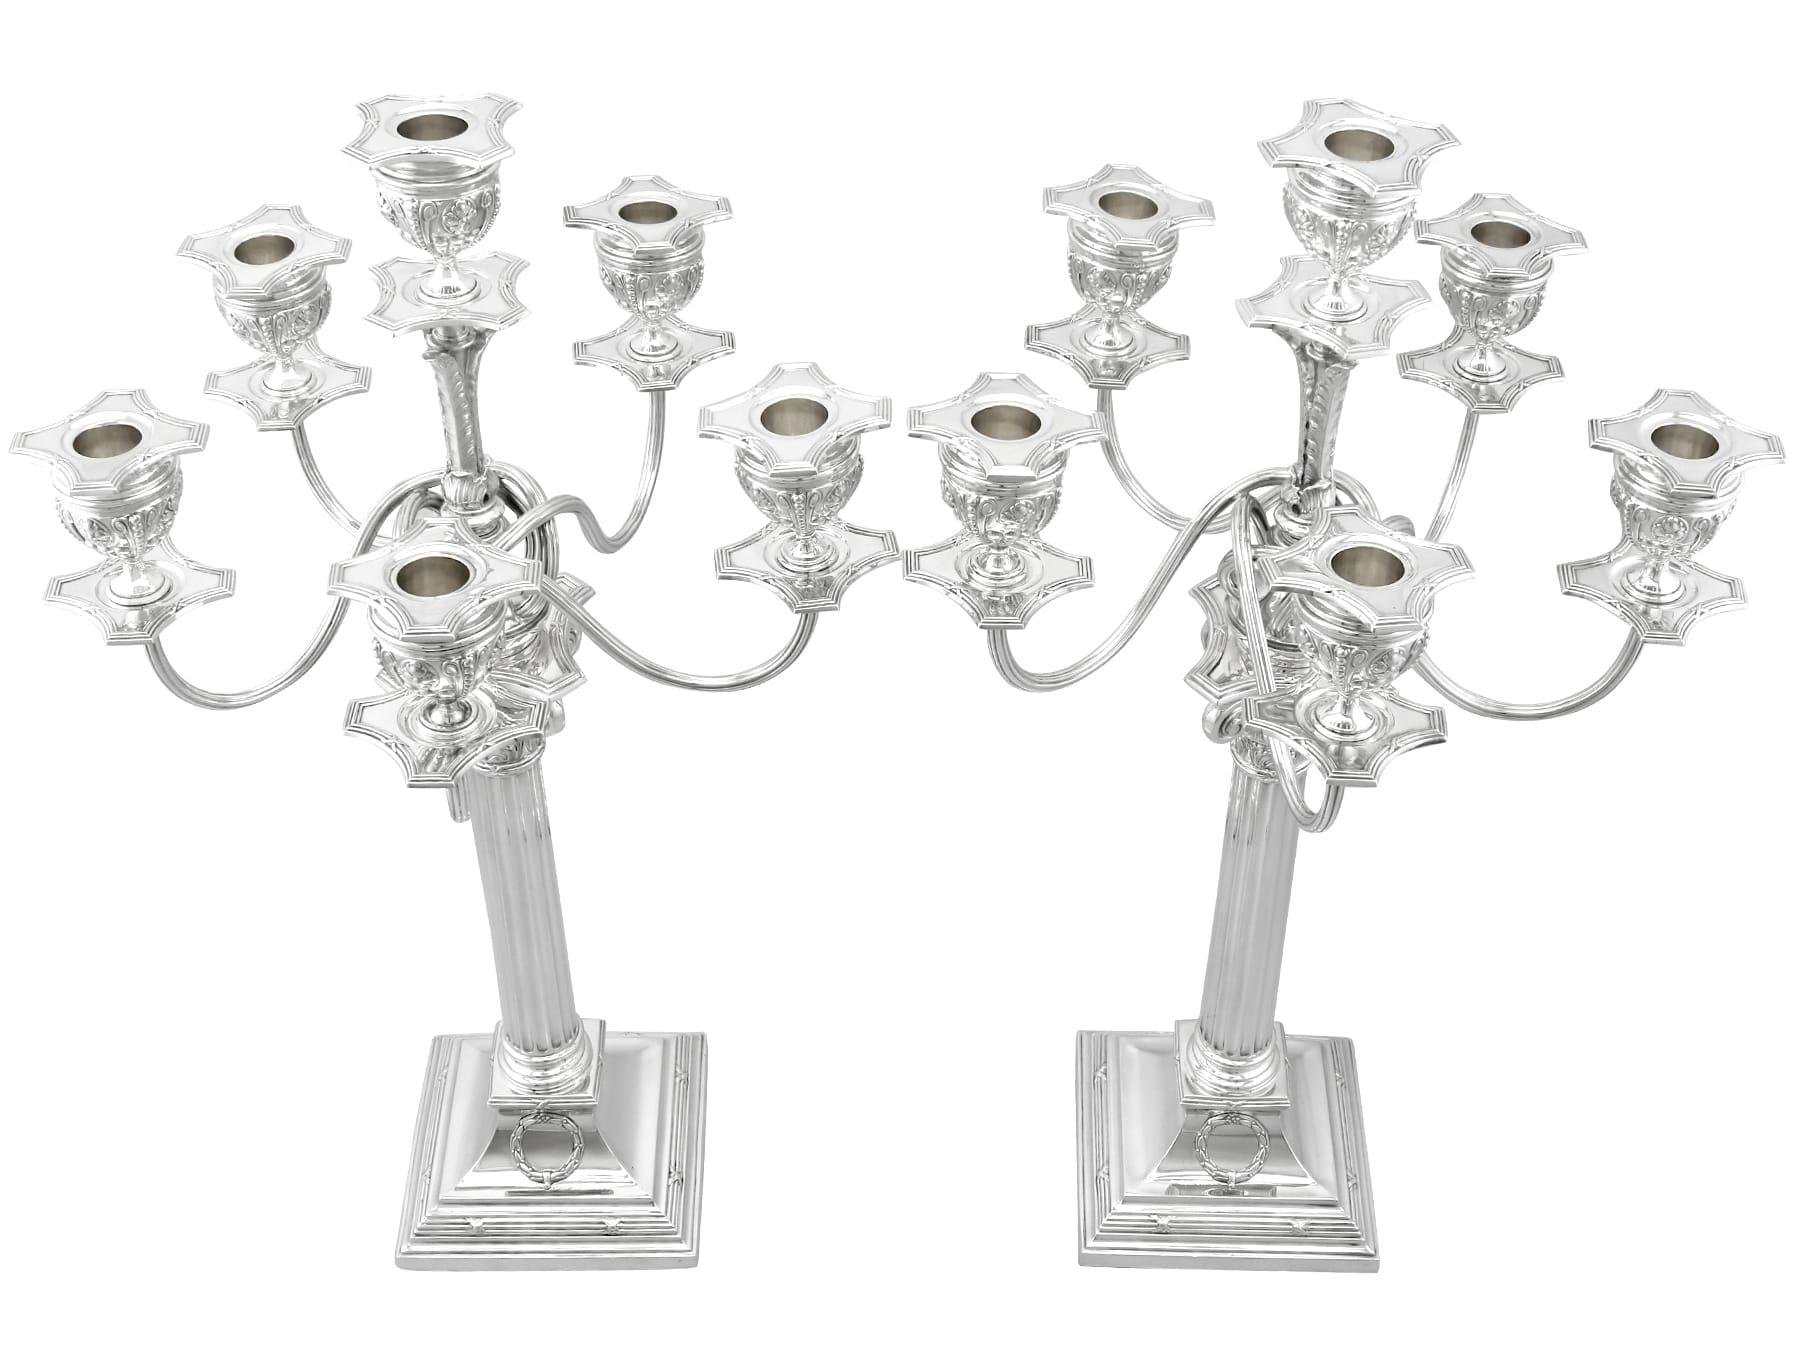 An exceptional, fine and impressive pair of antique German 800 standard silver six-light candelabra; an addition to our ornamental silverware collection
These exceptional antique German silver candelabra have a square shaped form to a cylindrical